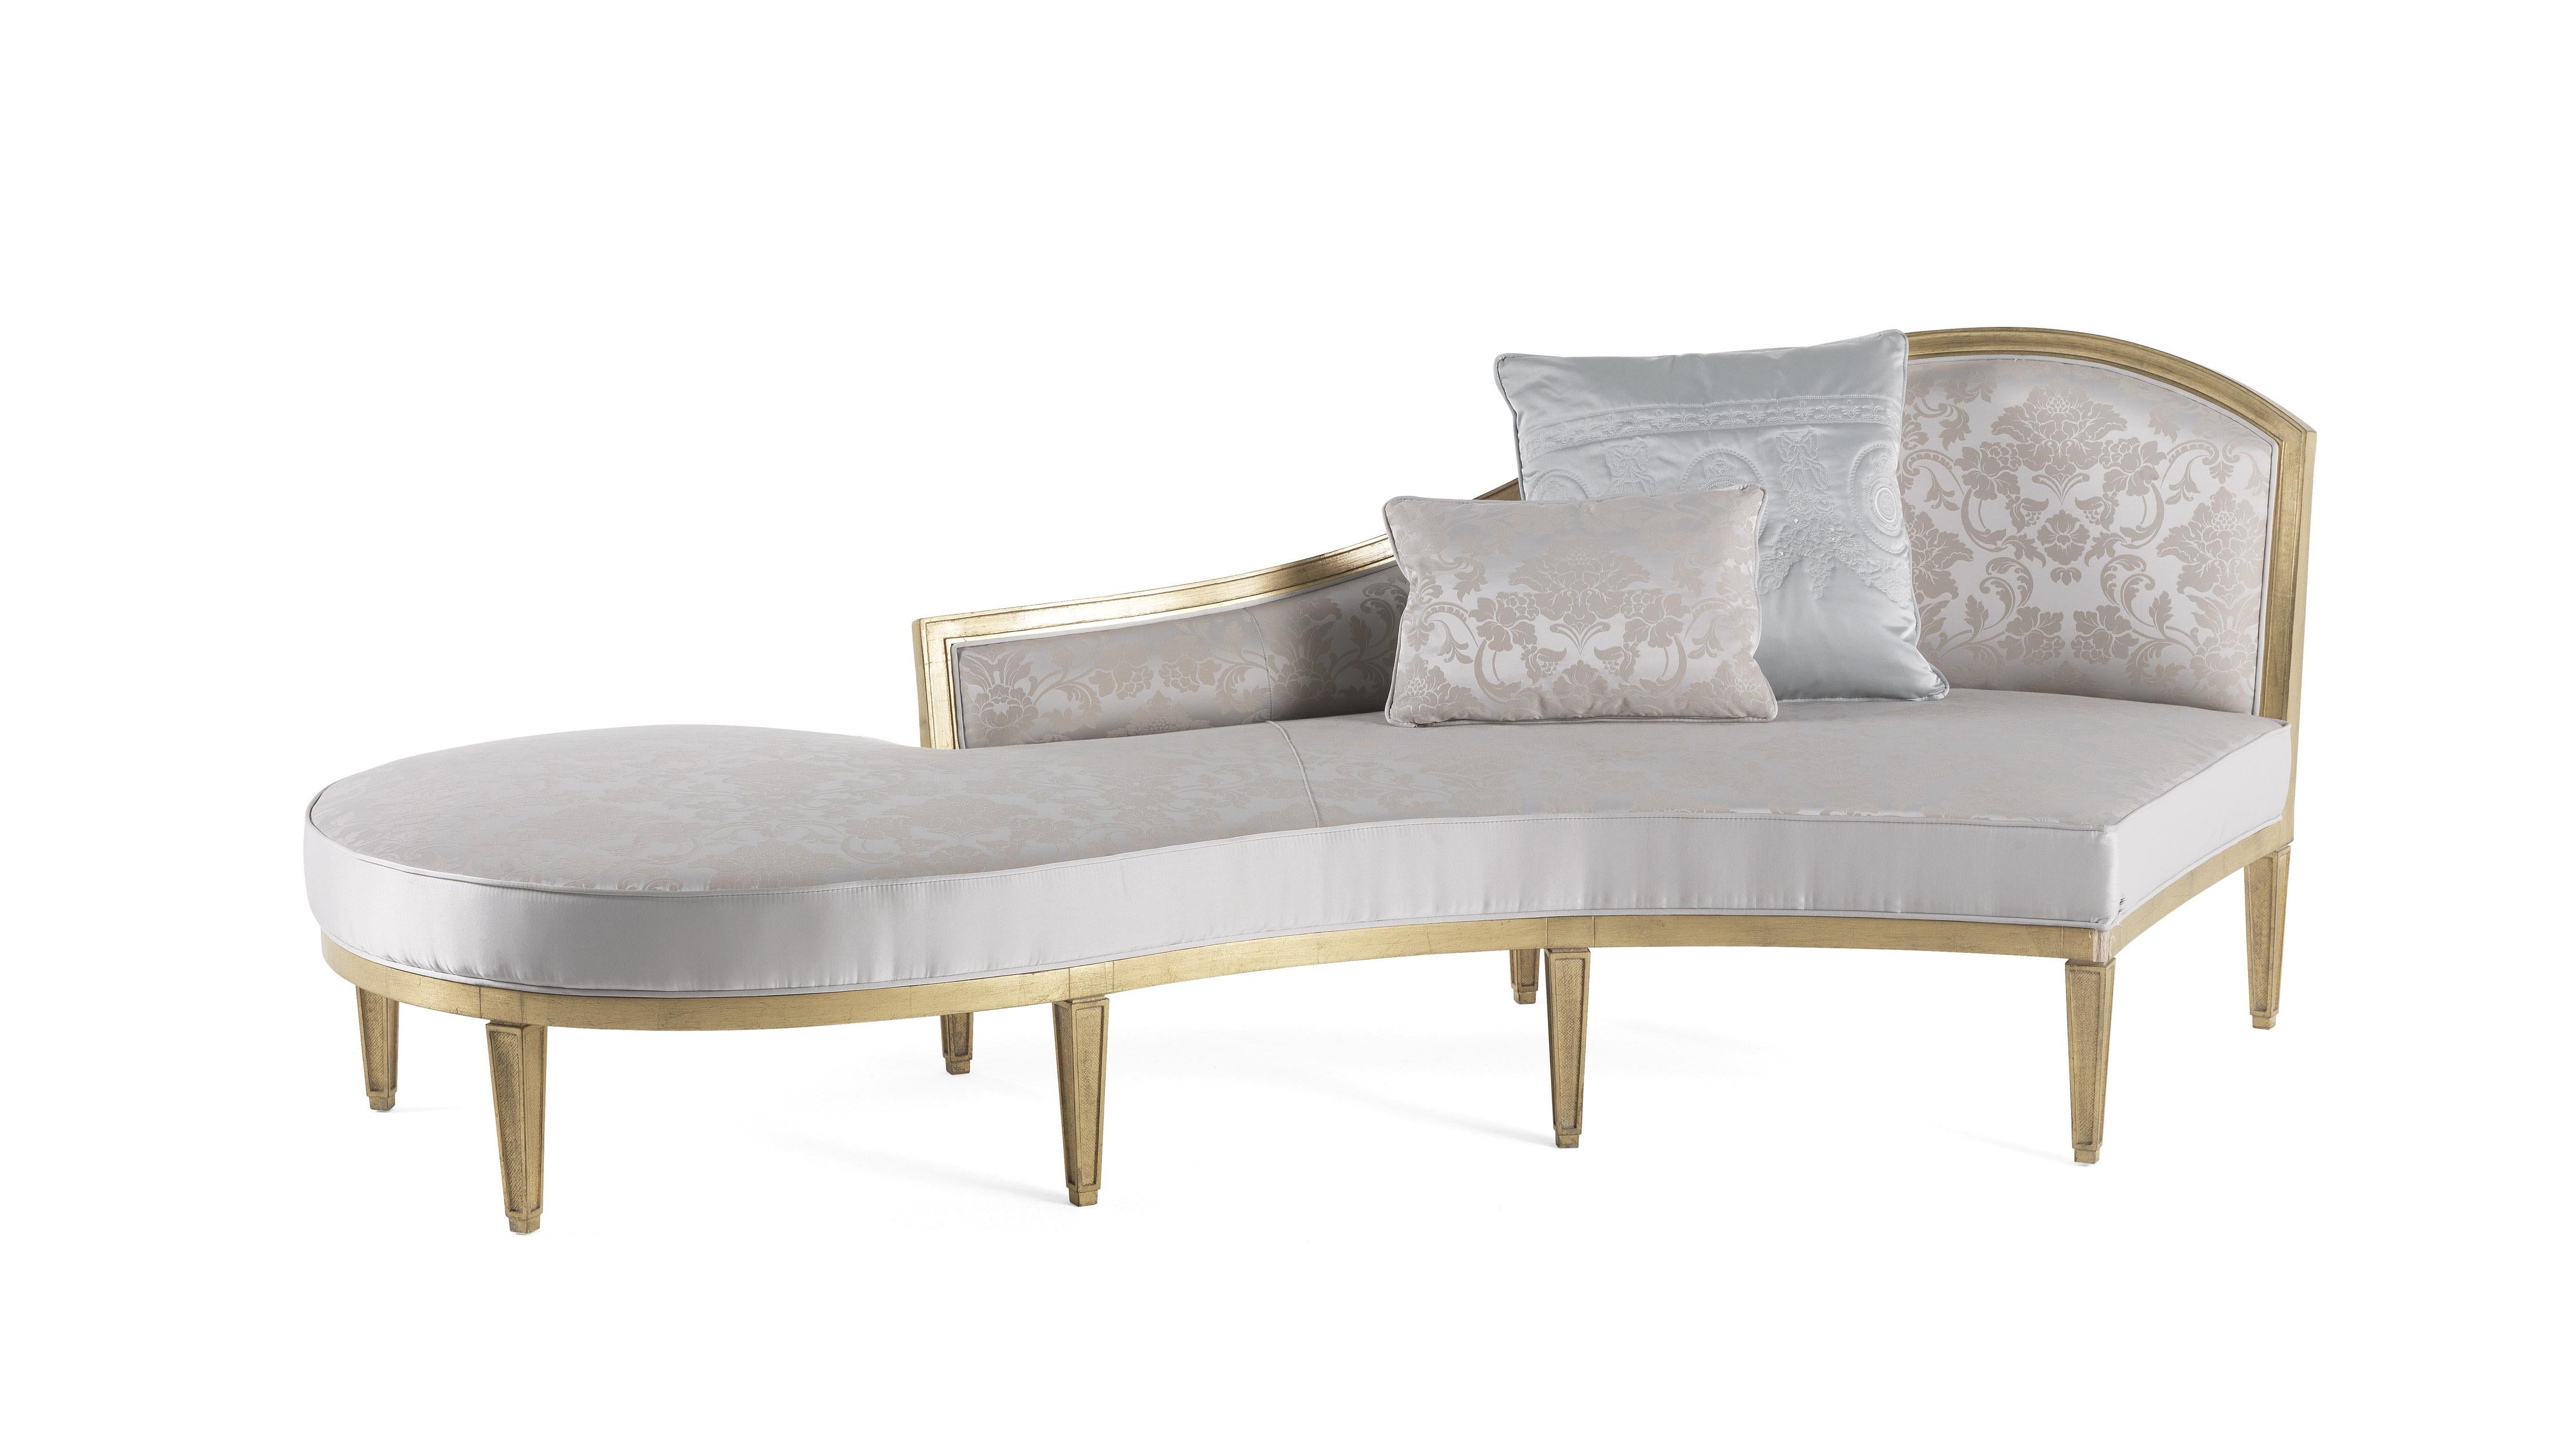 The elegance of a light and refined classic style for a welcoming and inviting chaise longue, Madine, which invites you to relax with its soft and sinuous shapes. The structure and feet with an antiqued gold leaf finish make Madine a luxurious and